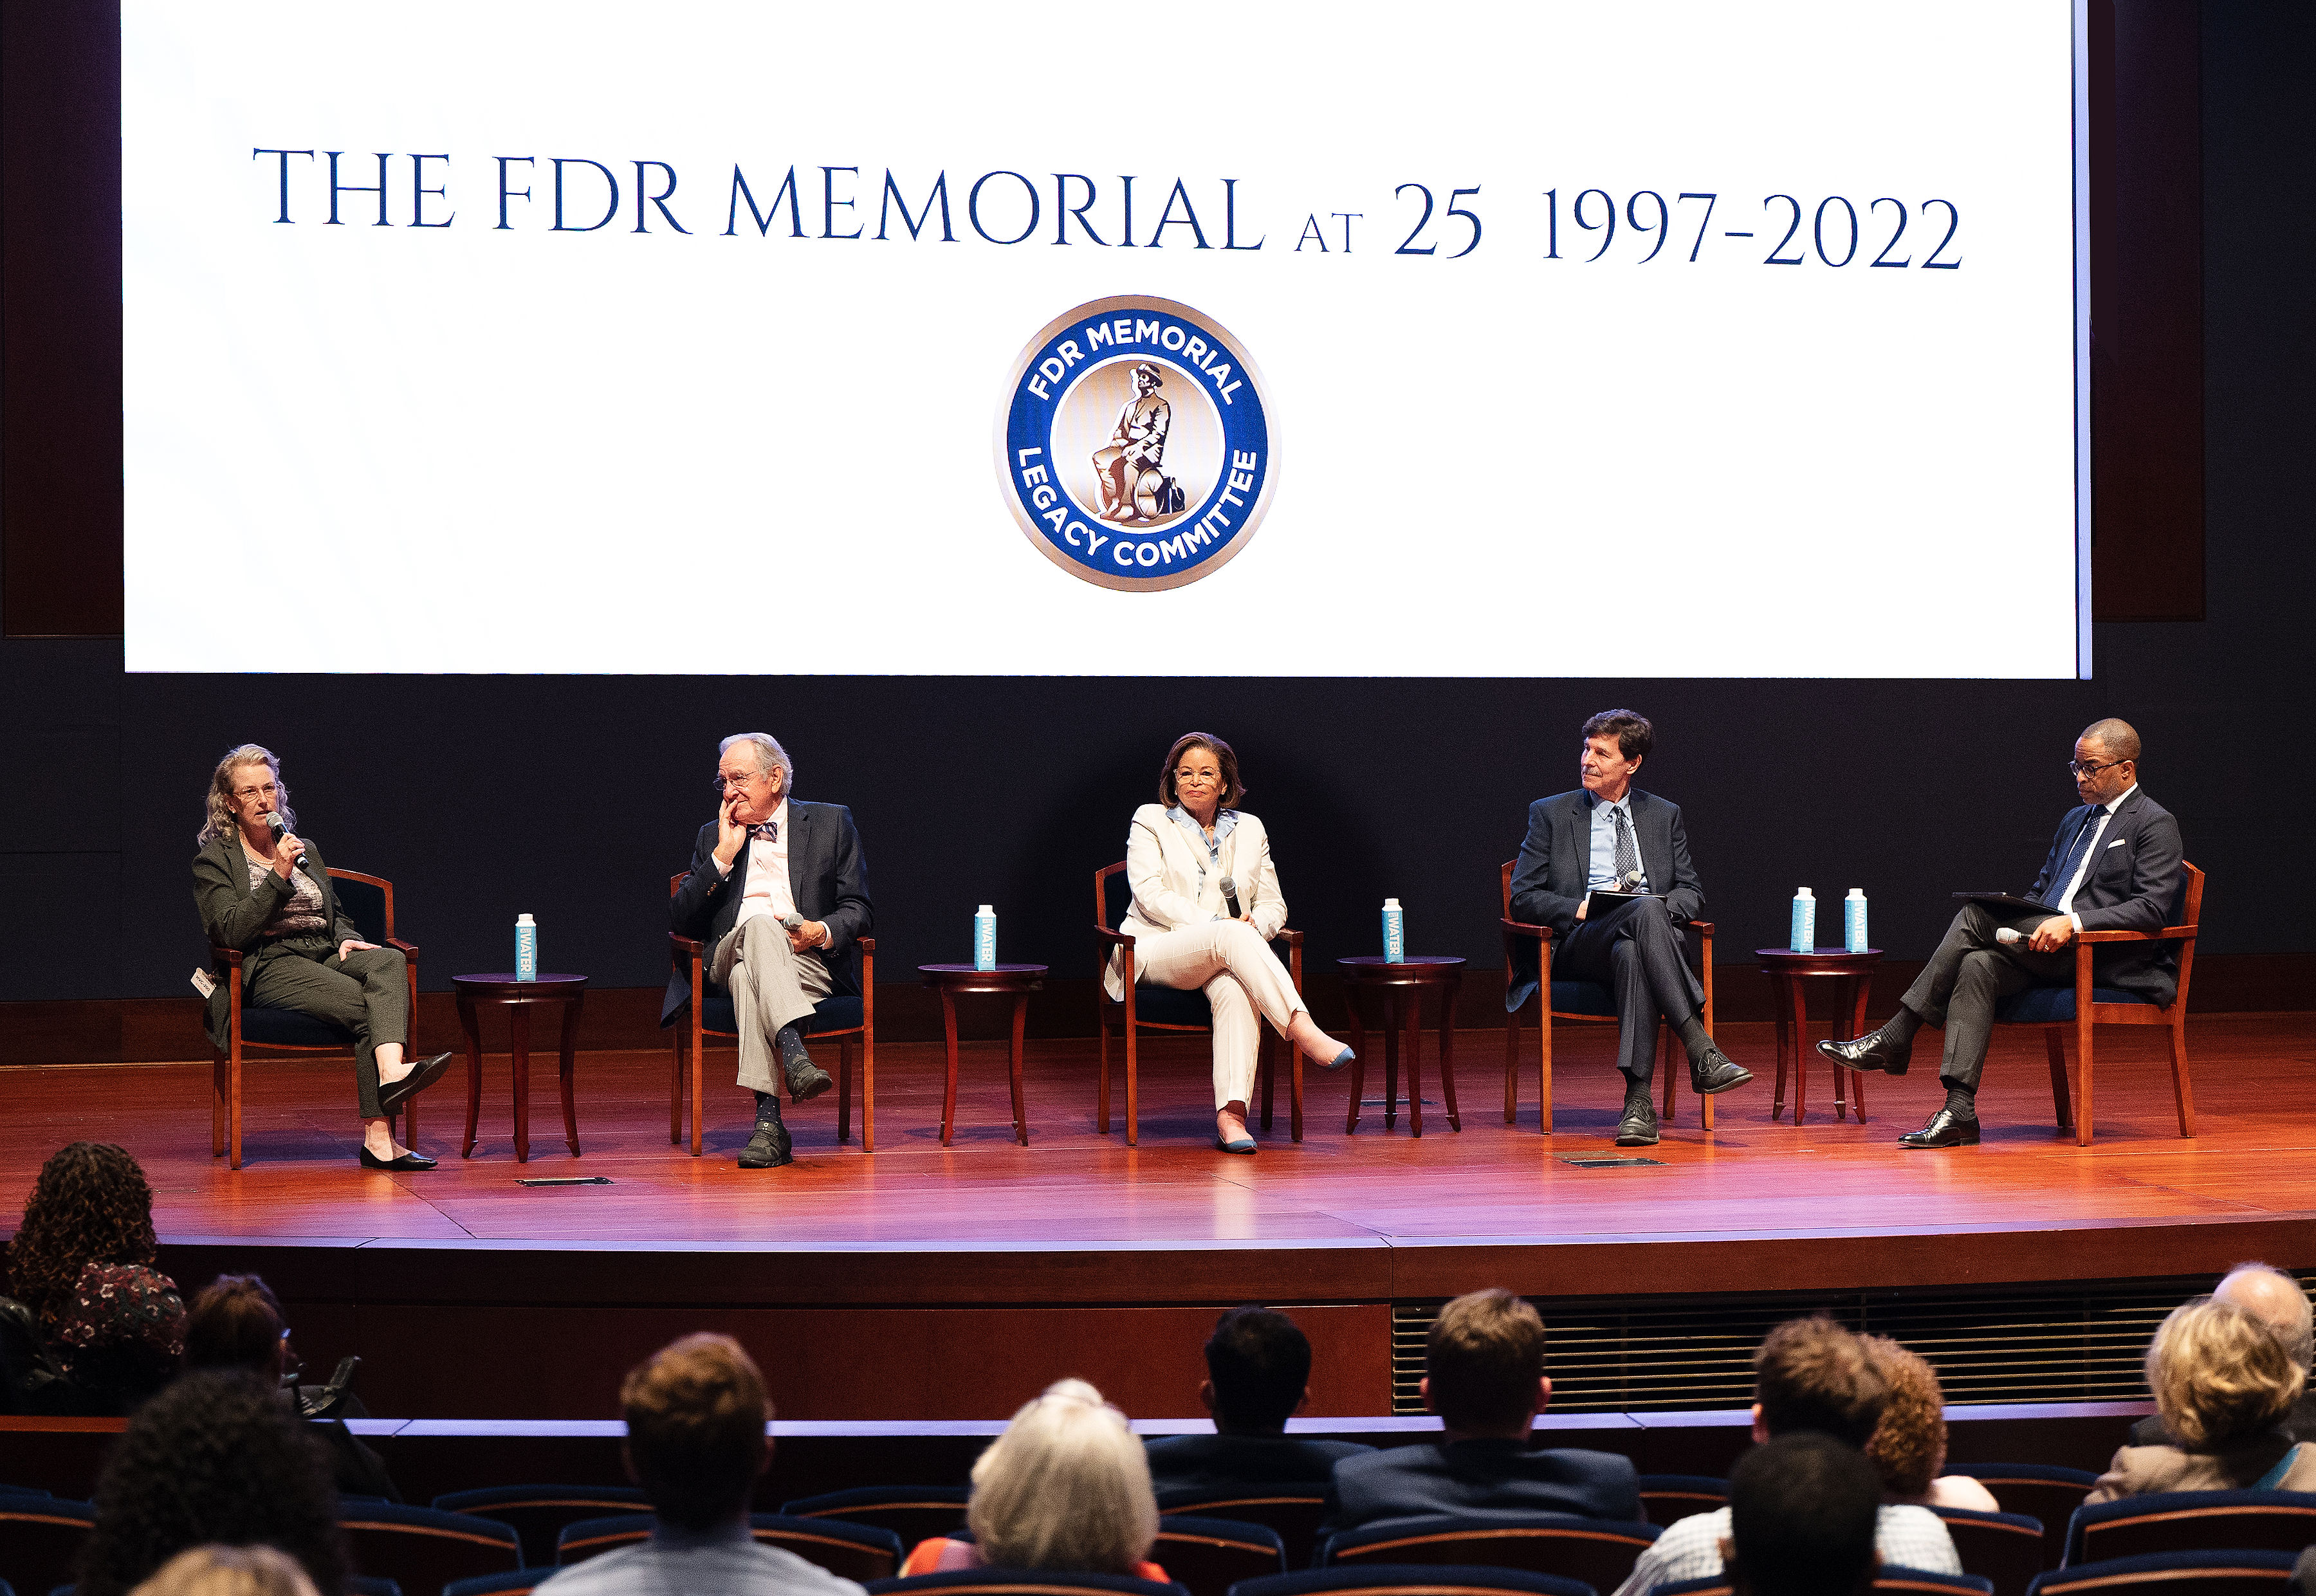 The FDR Memorial Legacy Committee hosted a panel discussion titled “The FDR Memorial – A Reflection on the Past and a Plan for the Future” to discuss the evolution of the FDR Memorial and how that progress may impact the future of our nation’s monuments. From left to right panel participants included: Mary Eileen Dolan, Co-Founder and Executive Director, FDR Memorial Legacy; retired Senator Tom Harkin, D-Iowa; Valerie Jarrett, CEO, Obama Foundation; David Woolner, Ph.D., Senior Fellow and Resident Historian, Roosevelt Institute; and Jonathan Capehart, The Washington Post and MSNBC.